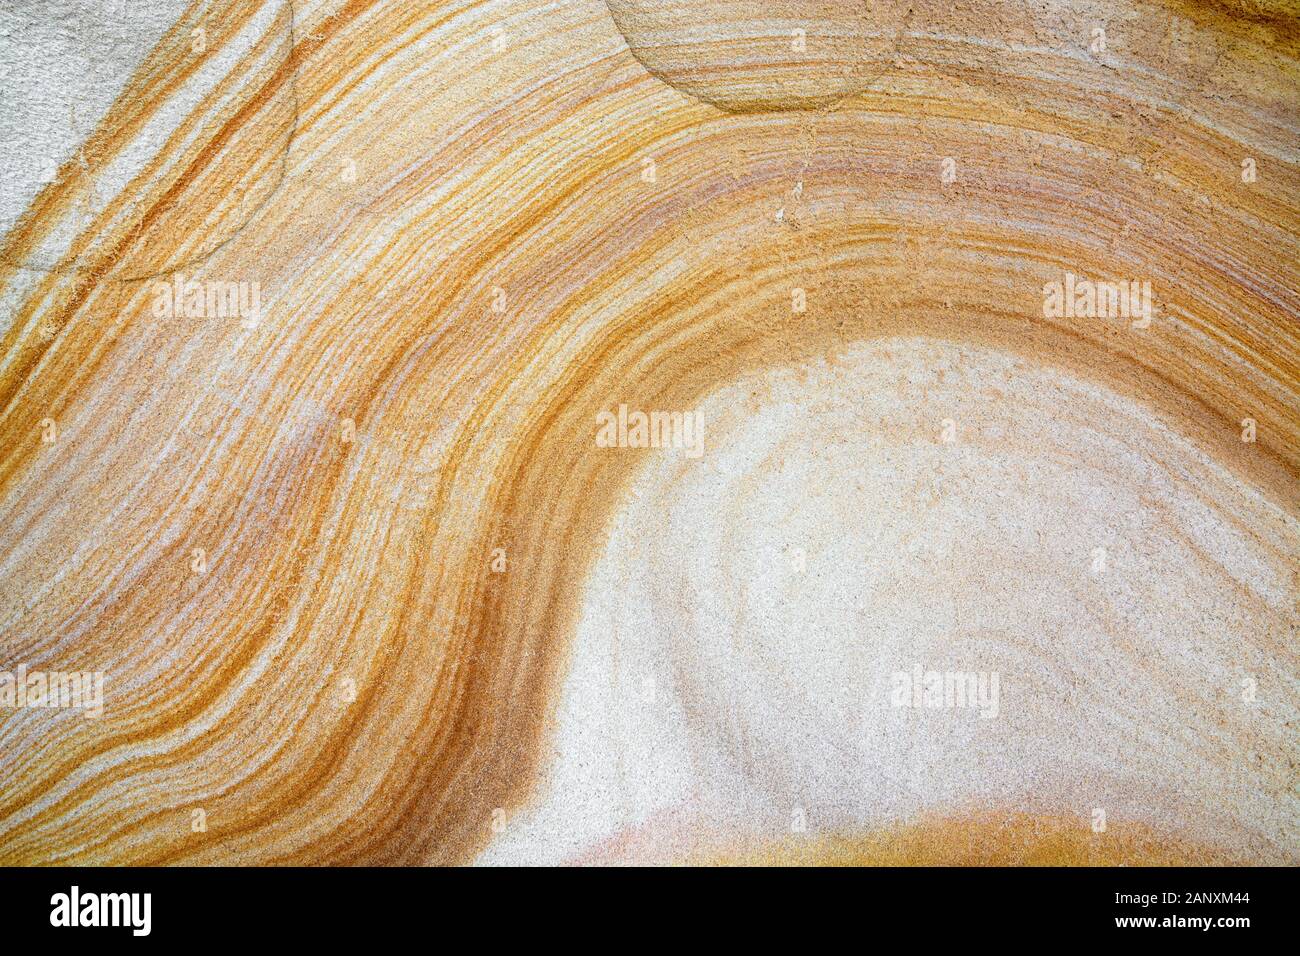 Close-up of natural sandstone texture with yellow and white layered wave pattern Stock Photo